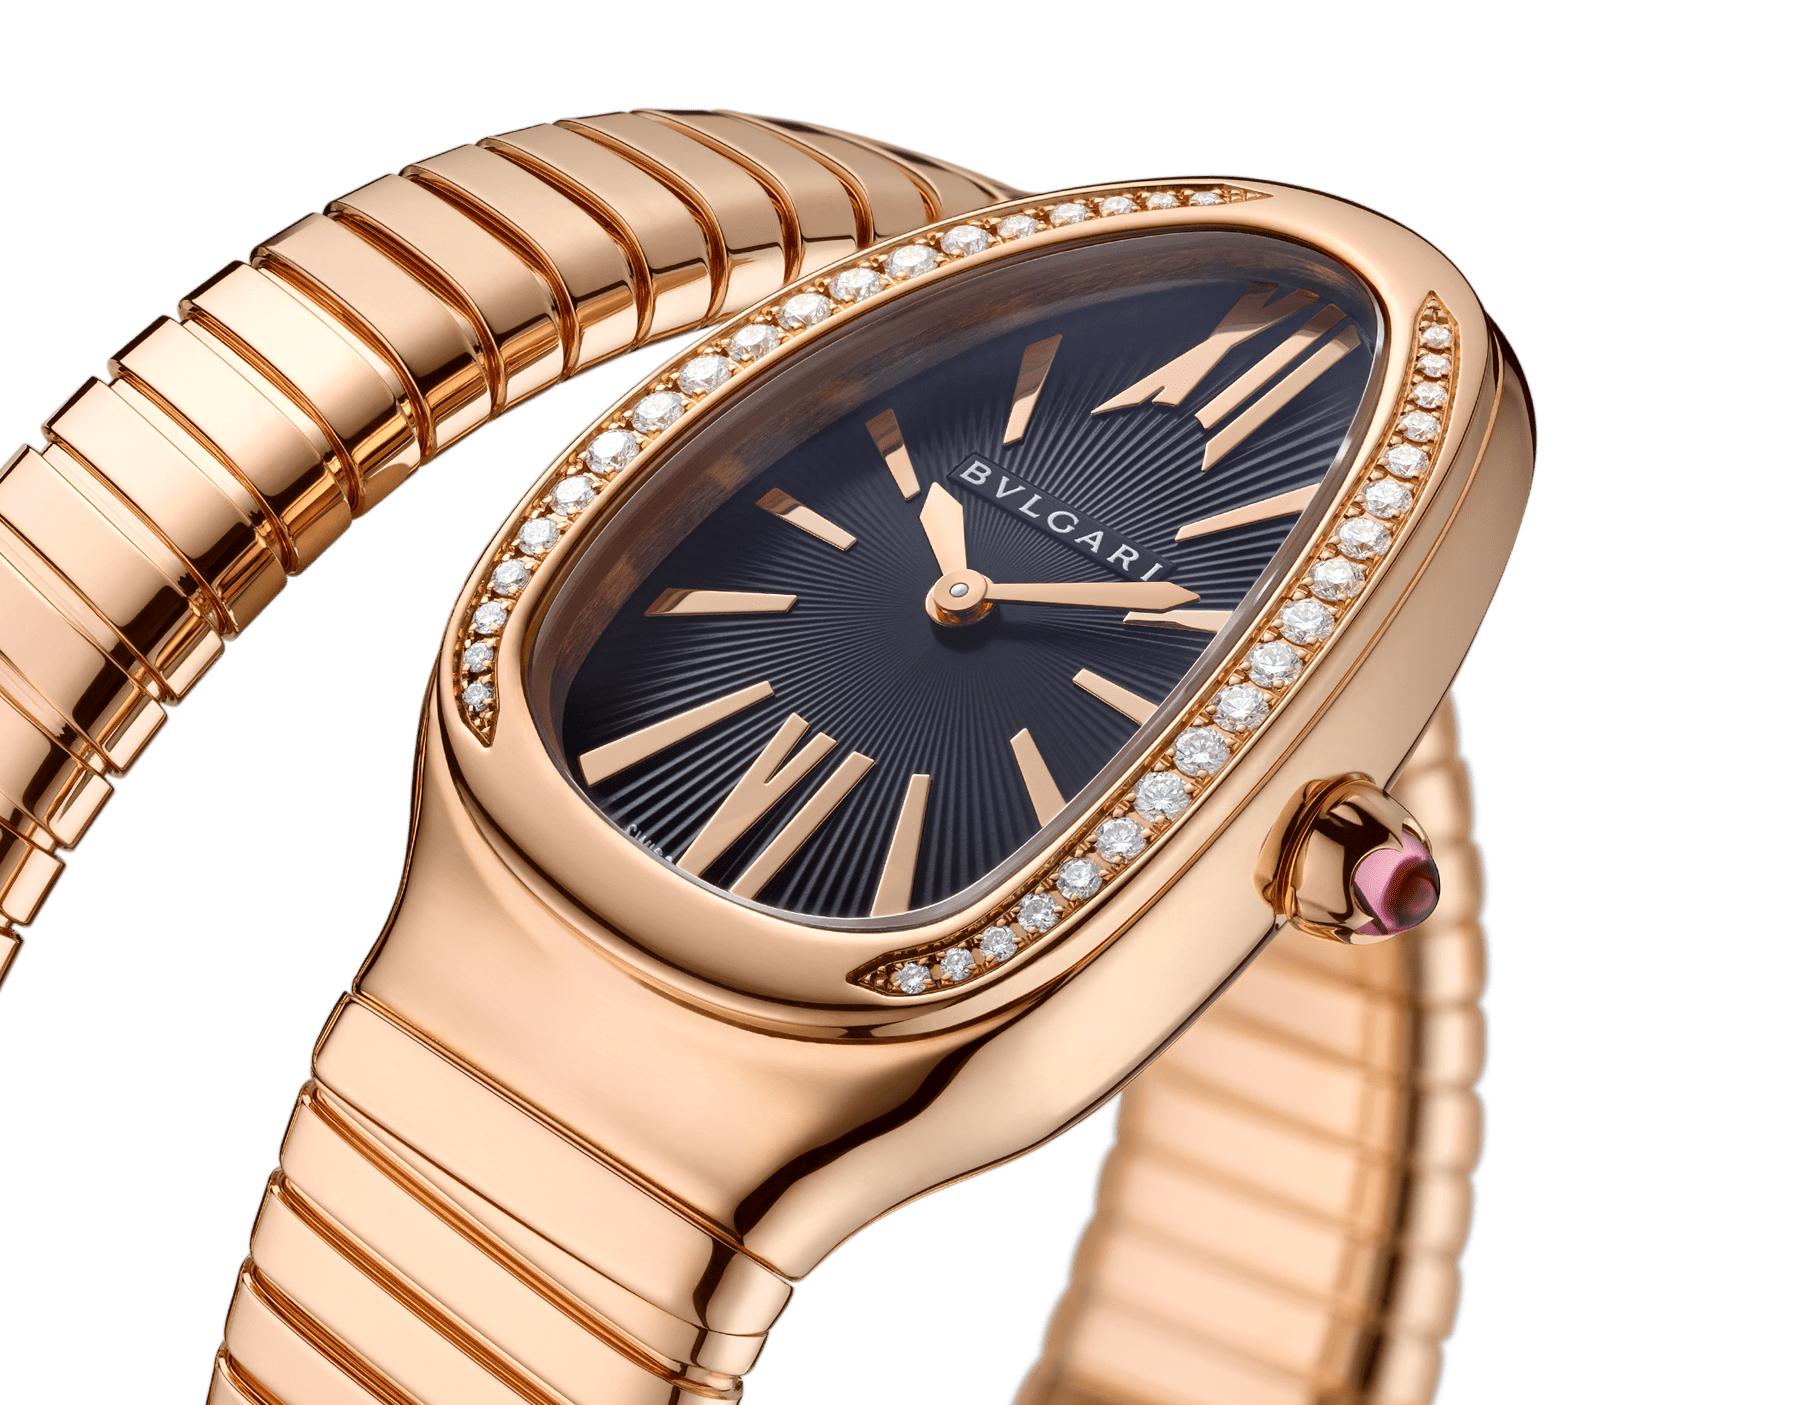 Constructed in the figure of a snake, the Serpenti is one of Bulgari's most famous icons.

Serpenti Tubogas watch with quartz movement, 35 mm 18 kt rose gold curved case set with brilliant cut diamond, 18 kt rose gold crown set with a cabochon cut